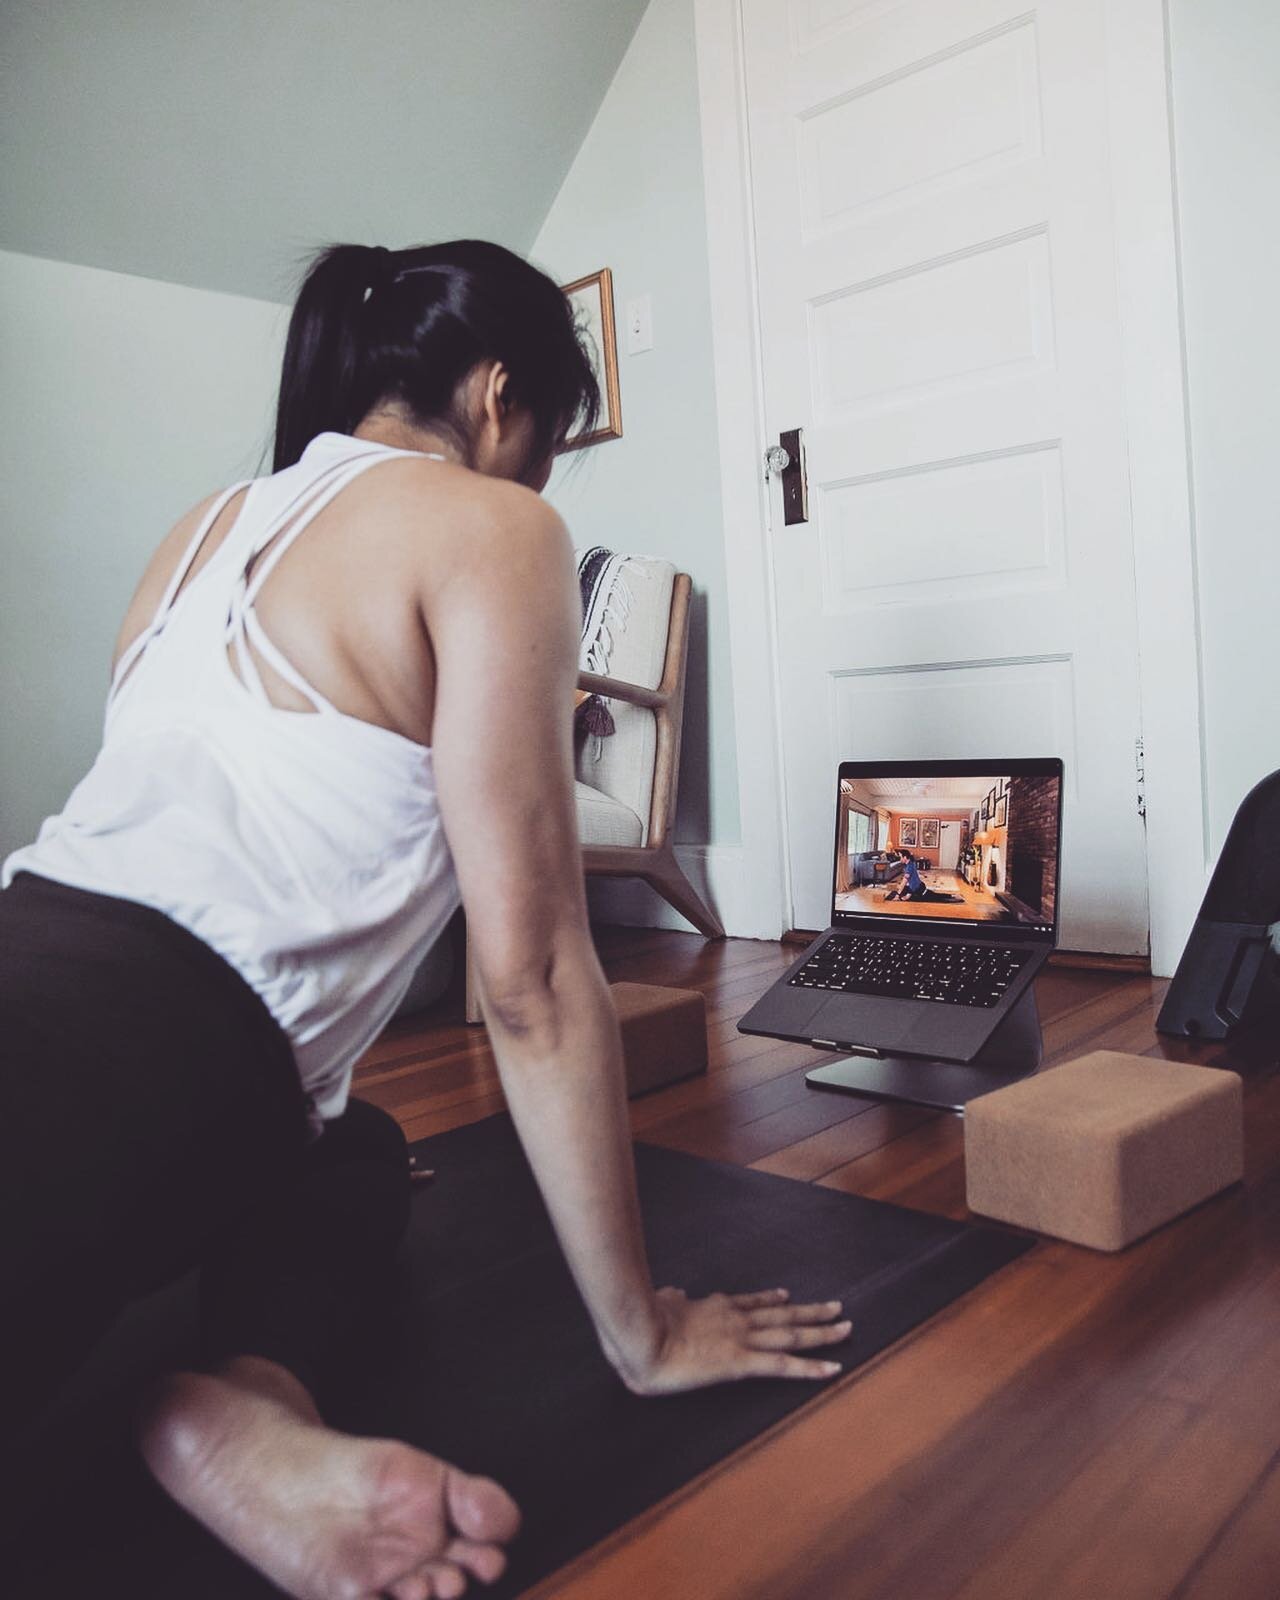 Why online yoga? Because kids are unpredictable, schedules change, driving or commuting eats up your precious time. 

There&rsquo;s freedom in deciding when. When to hit play, when to join live, when to take a rest day, when to do two classes back to